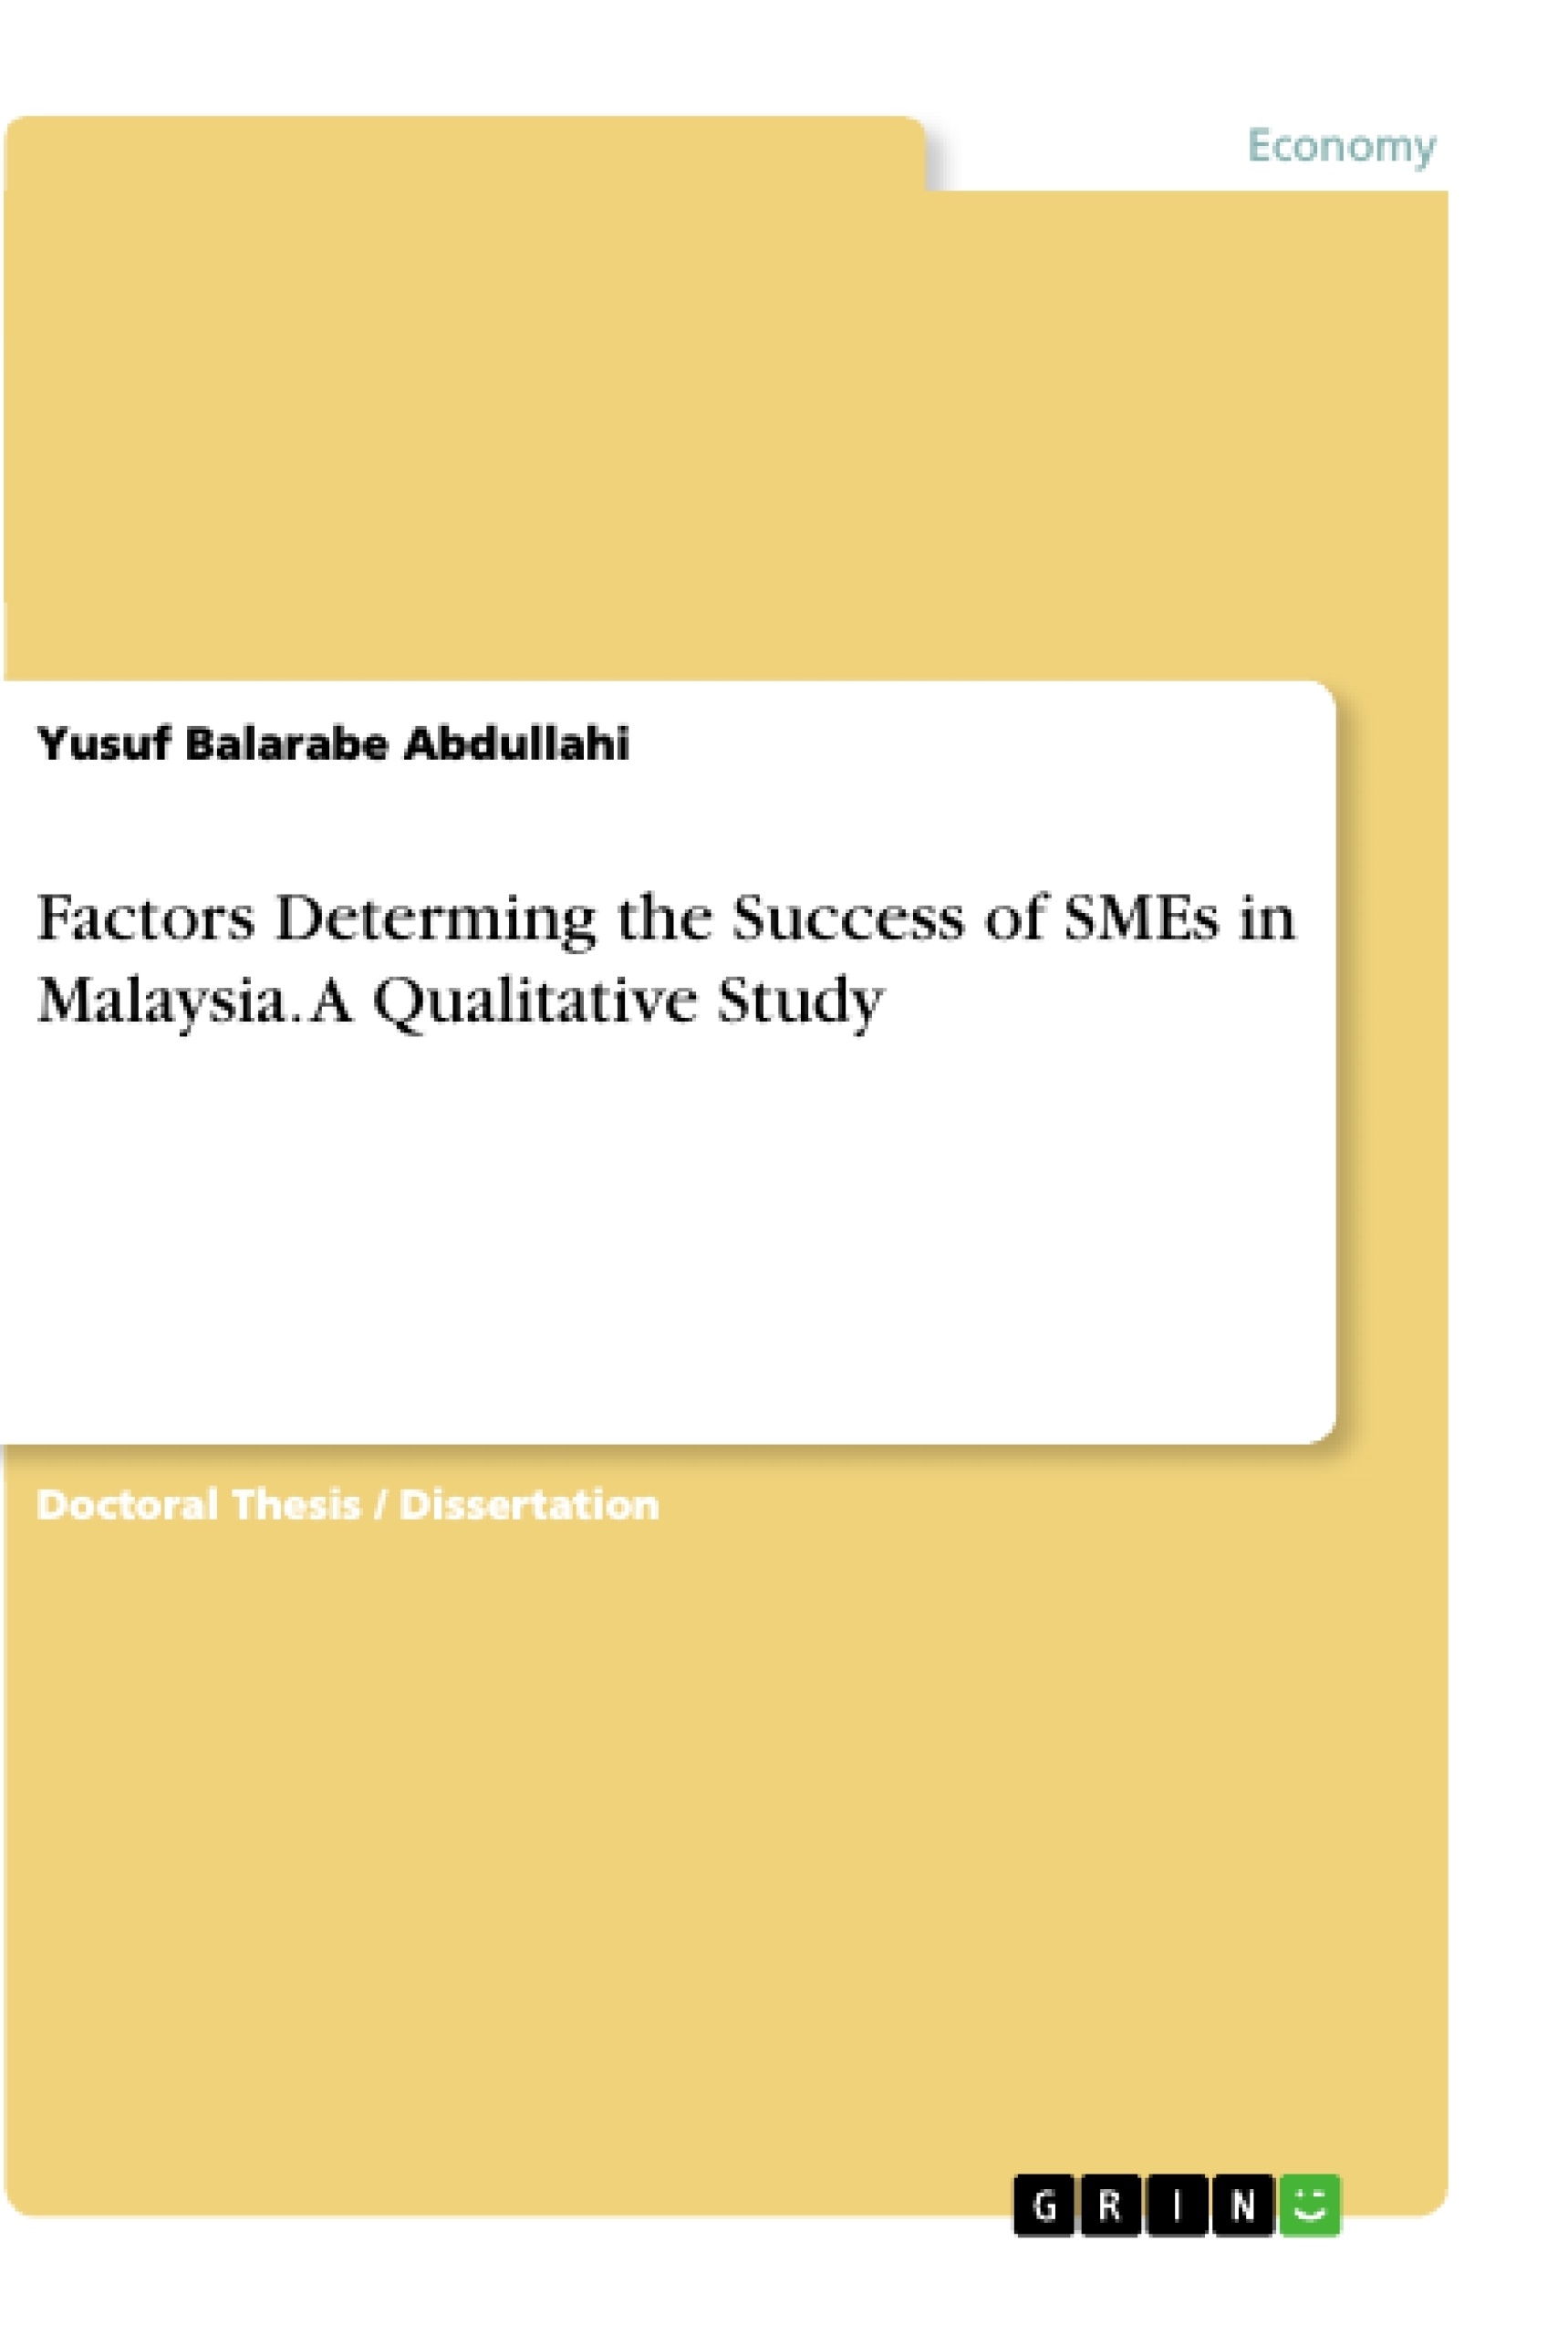 Title: Factors Determing the Success of SMEs in Malaysia. A Qualitative Study